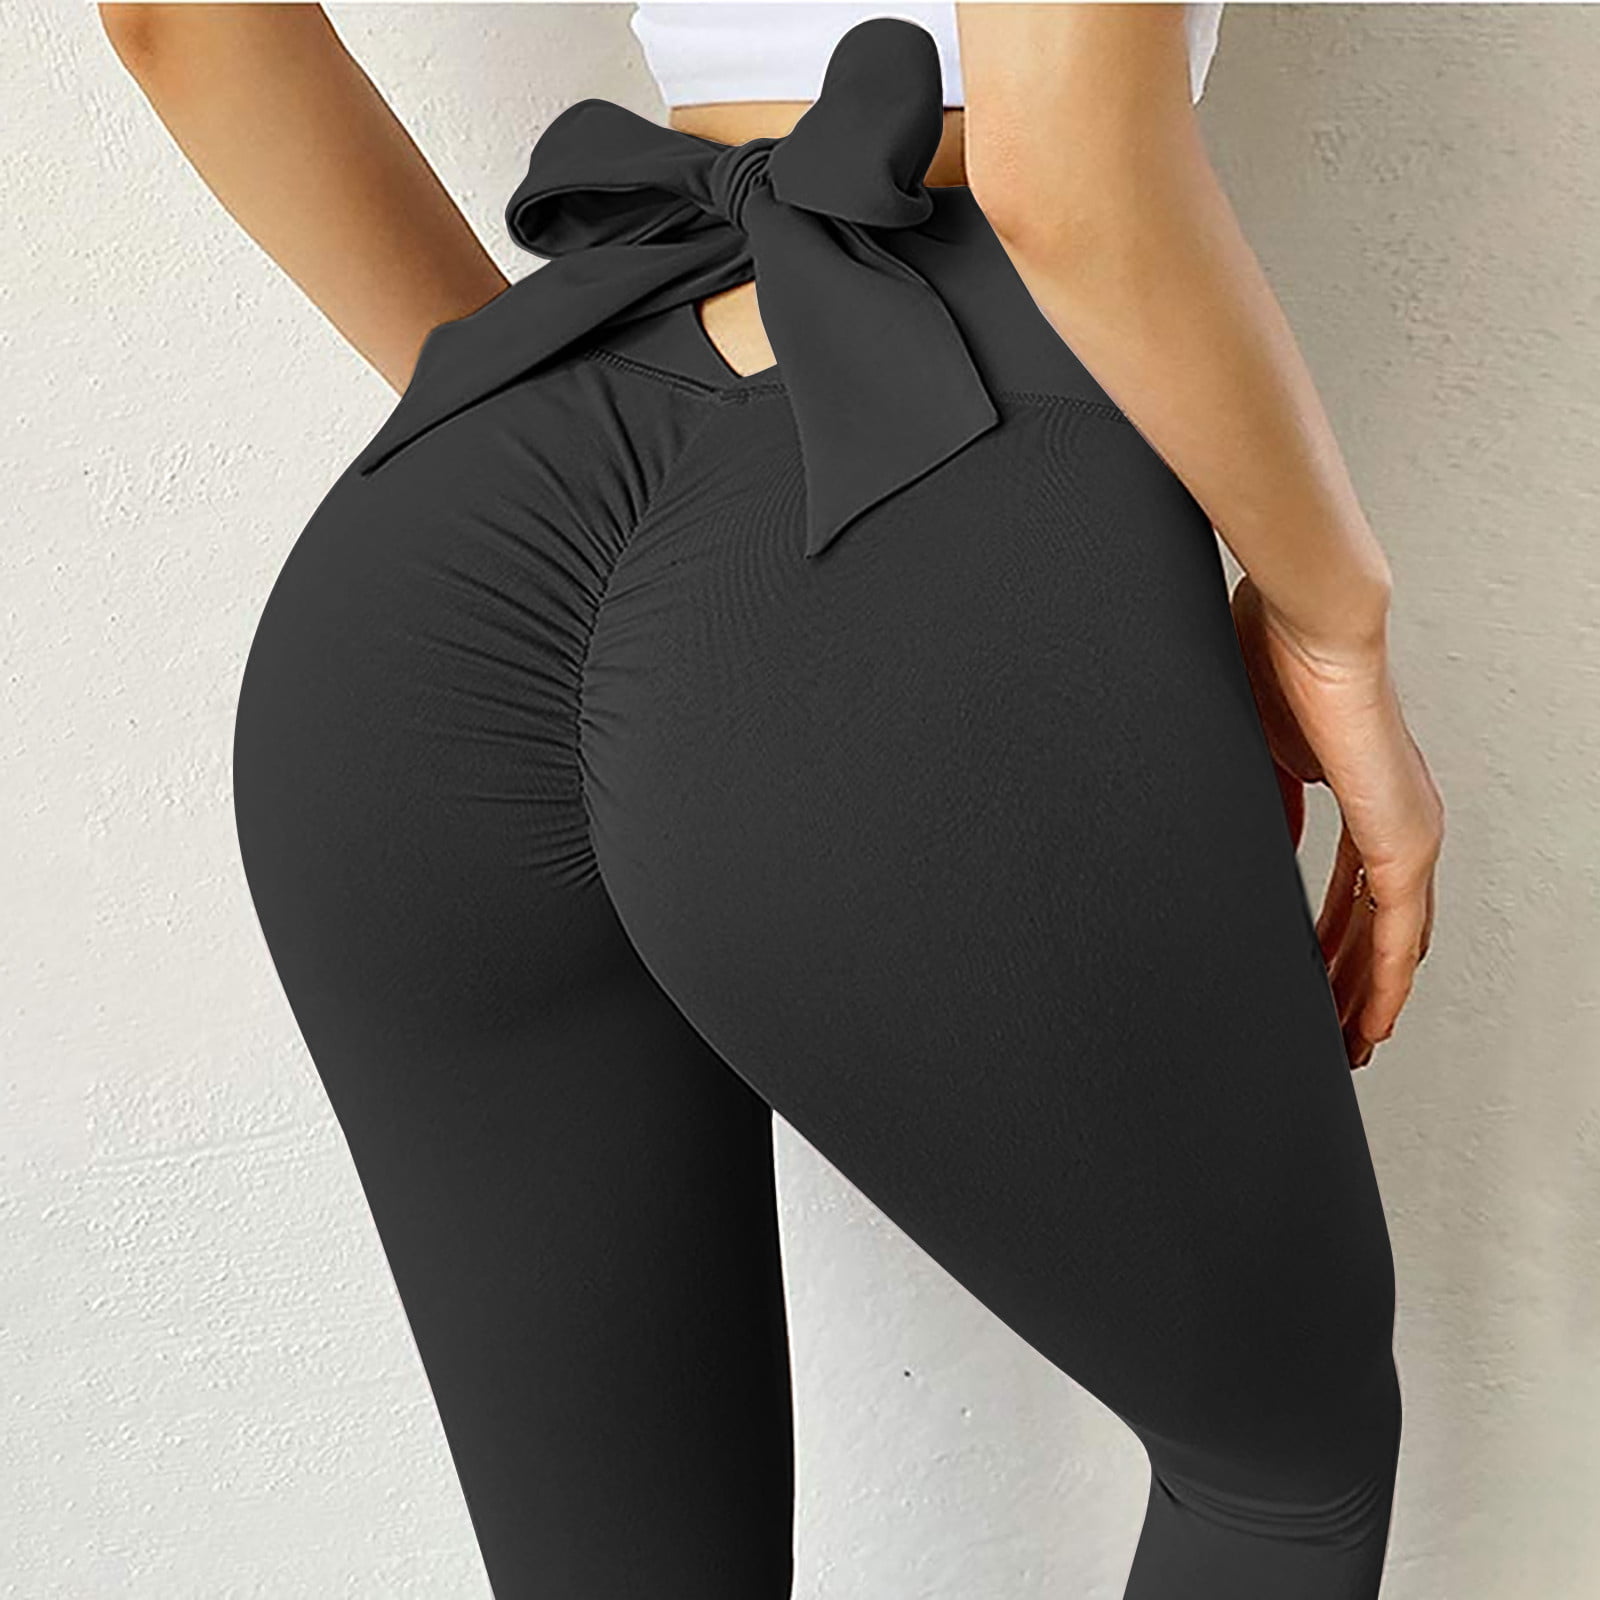  YAWOTS Women Peach Butt Gym Pants with Bow Tie High